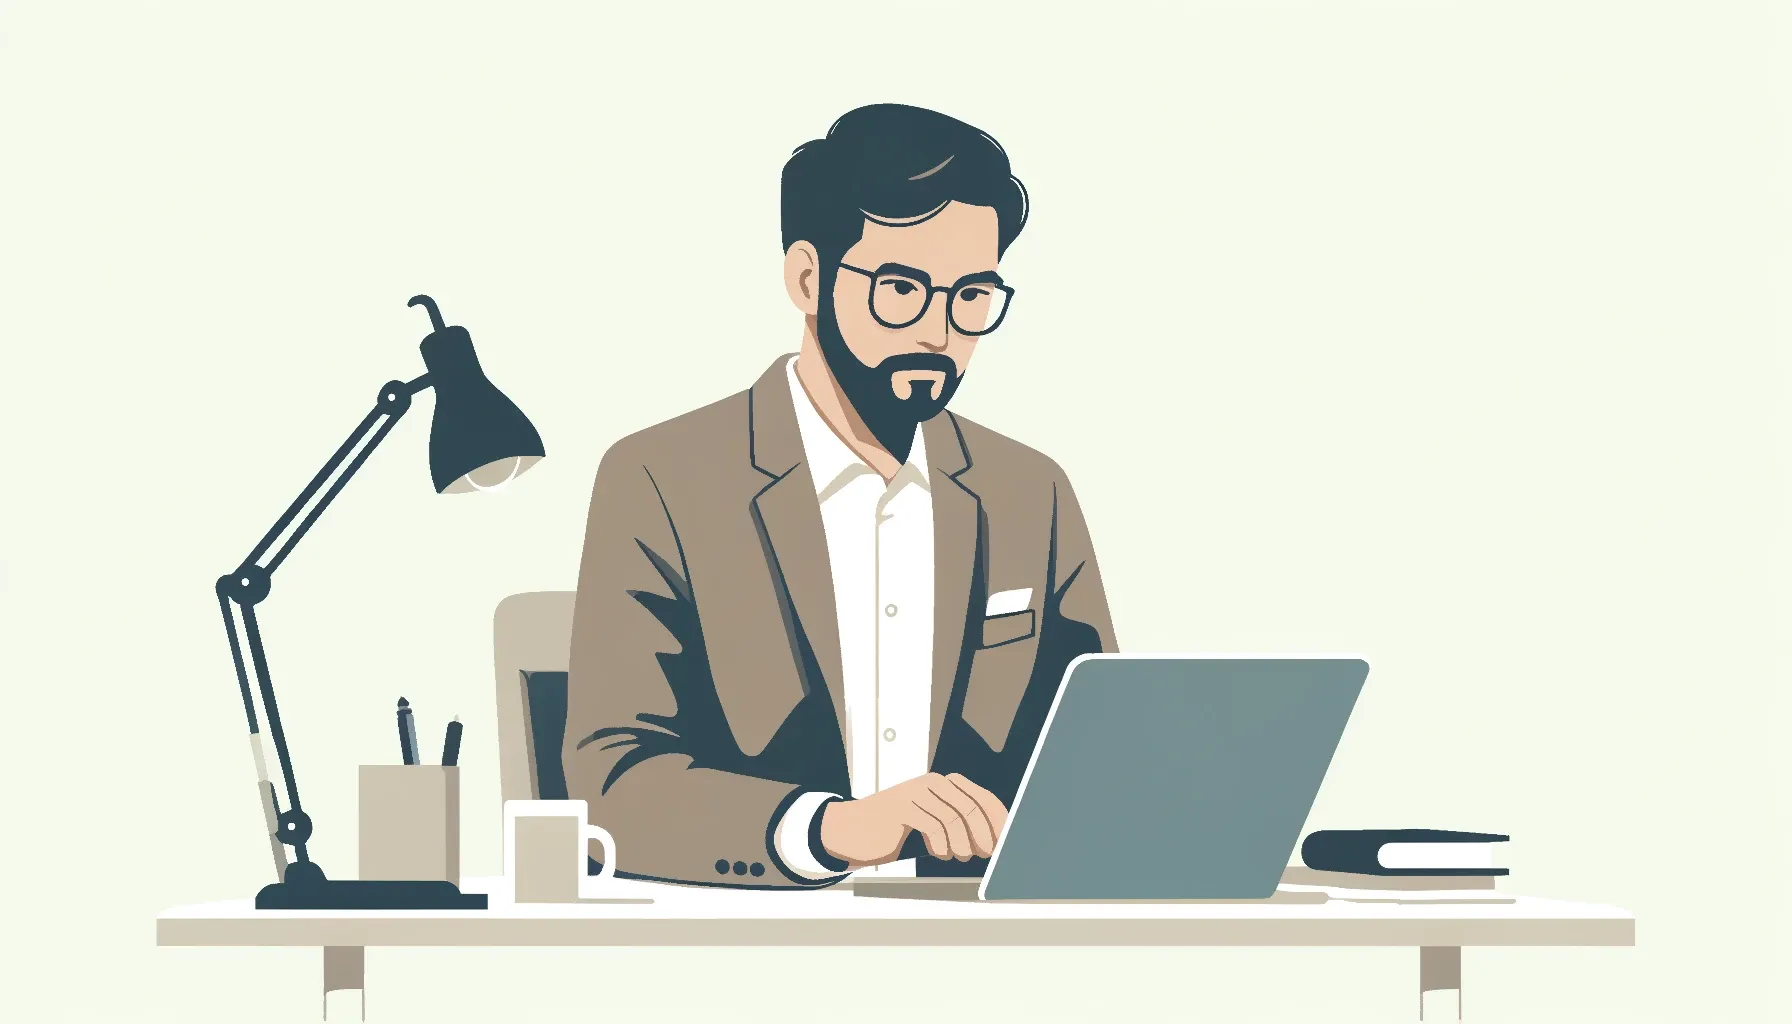 A simple drawing of an expert programmer, a middle-aged South Asian male, in a minimalist style. He is dressed in a smart casual outfit with a blazer